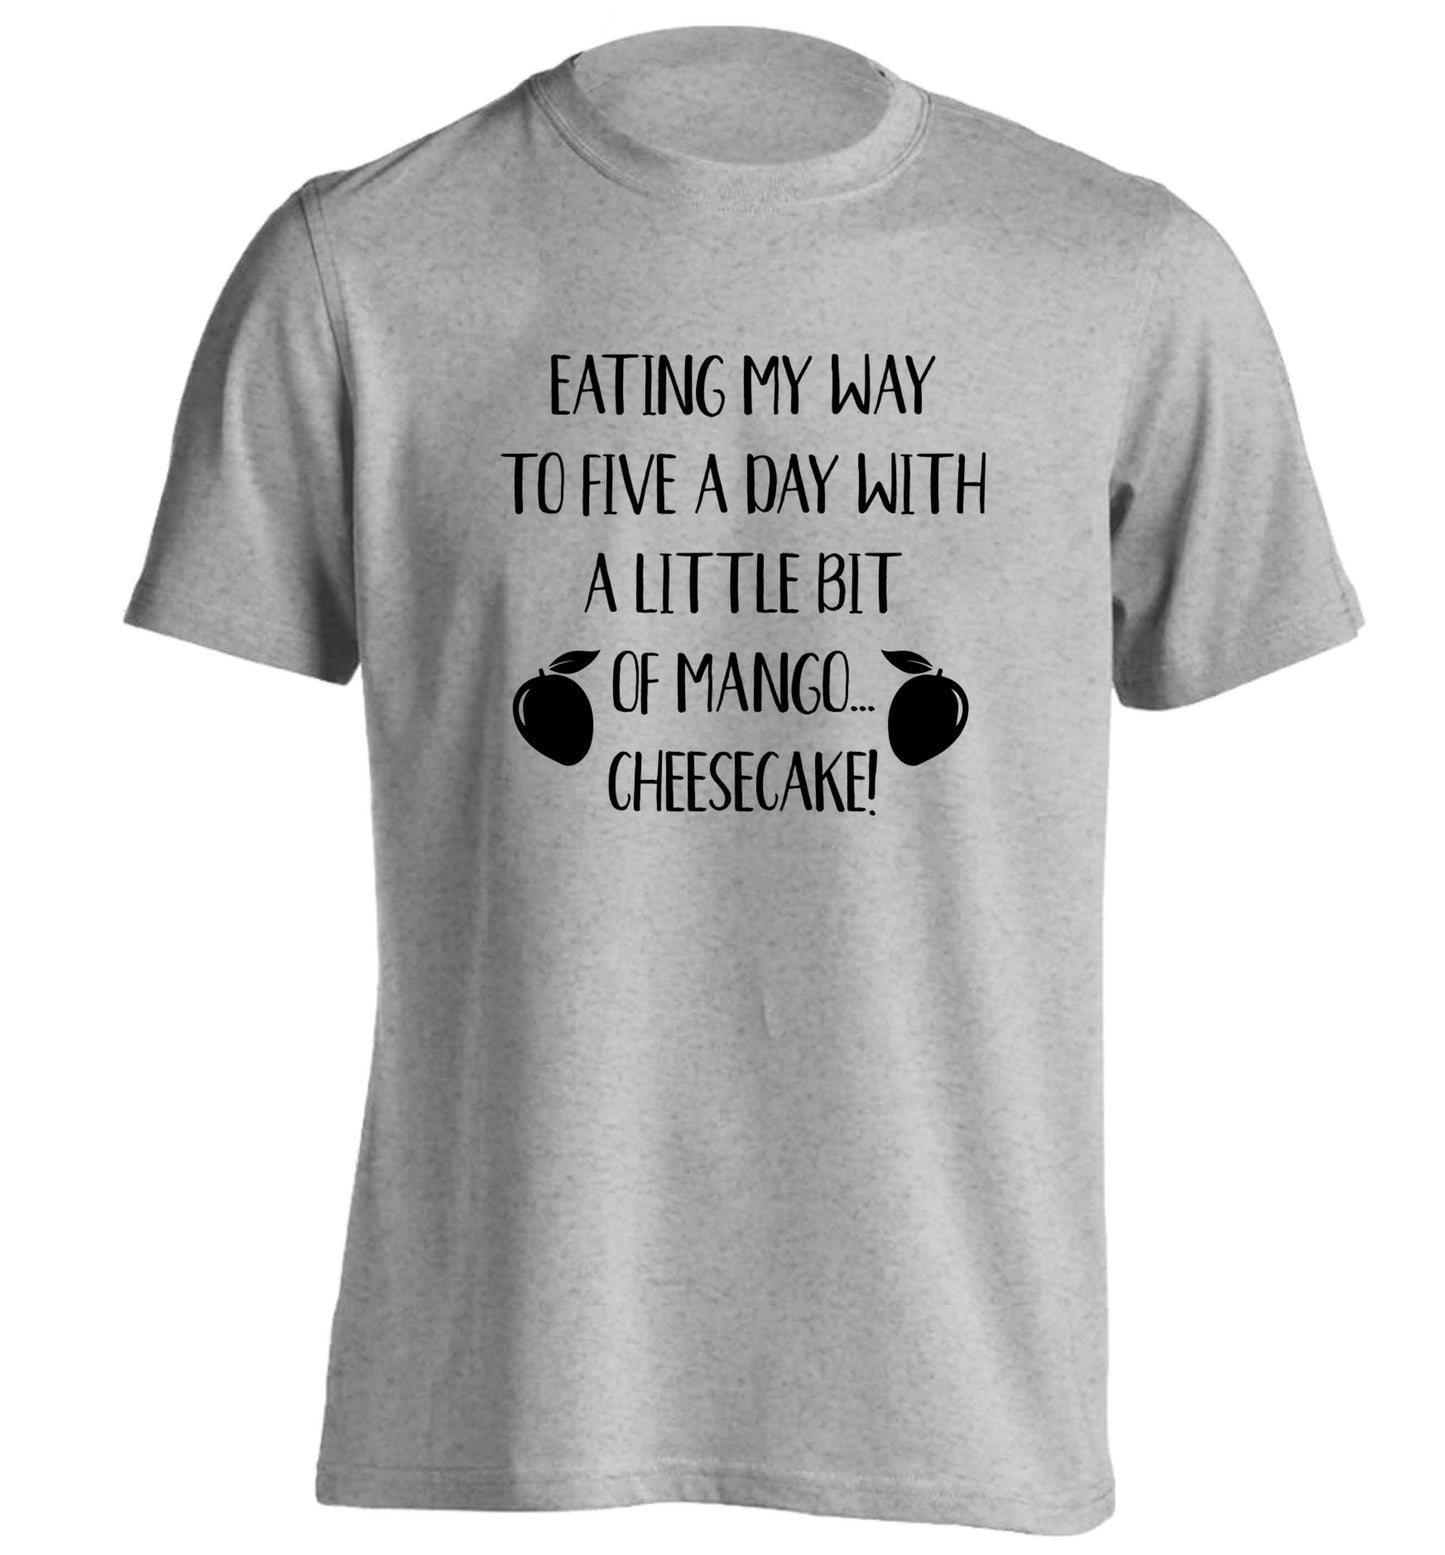 Eating my way to five a day with a little bit of mango cheesecake adults unisex grey Tshirt 2XL